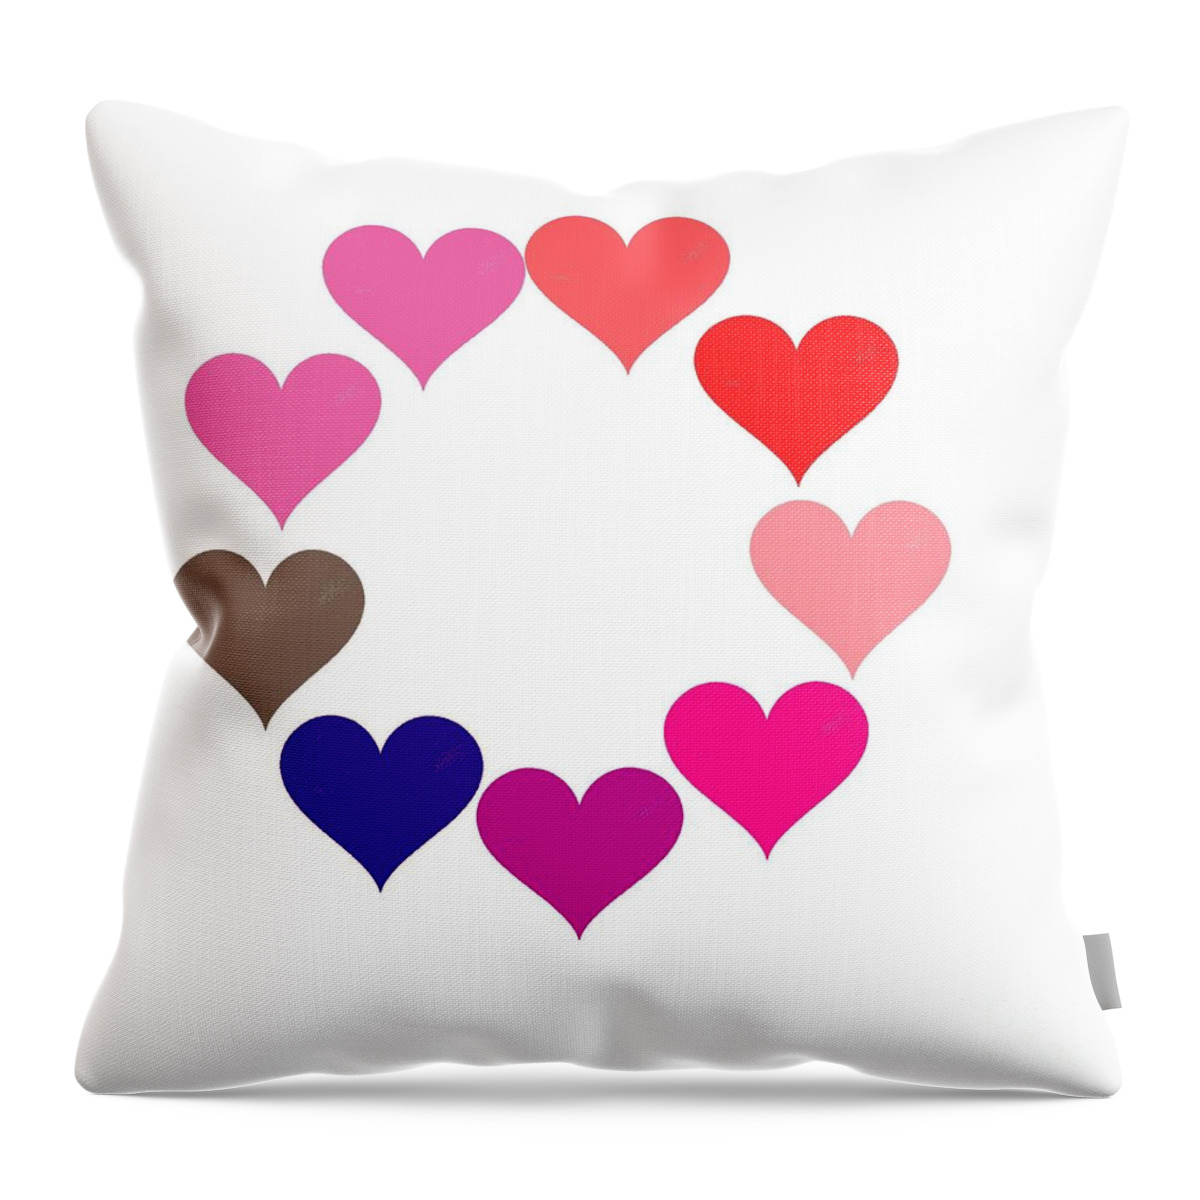 Rainbow Heart Ring Throw Pillow featuring the digital art Rainbow Heart Ring by Michael Skinner